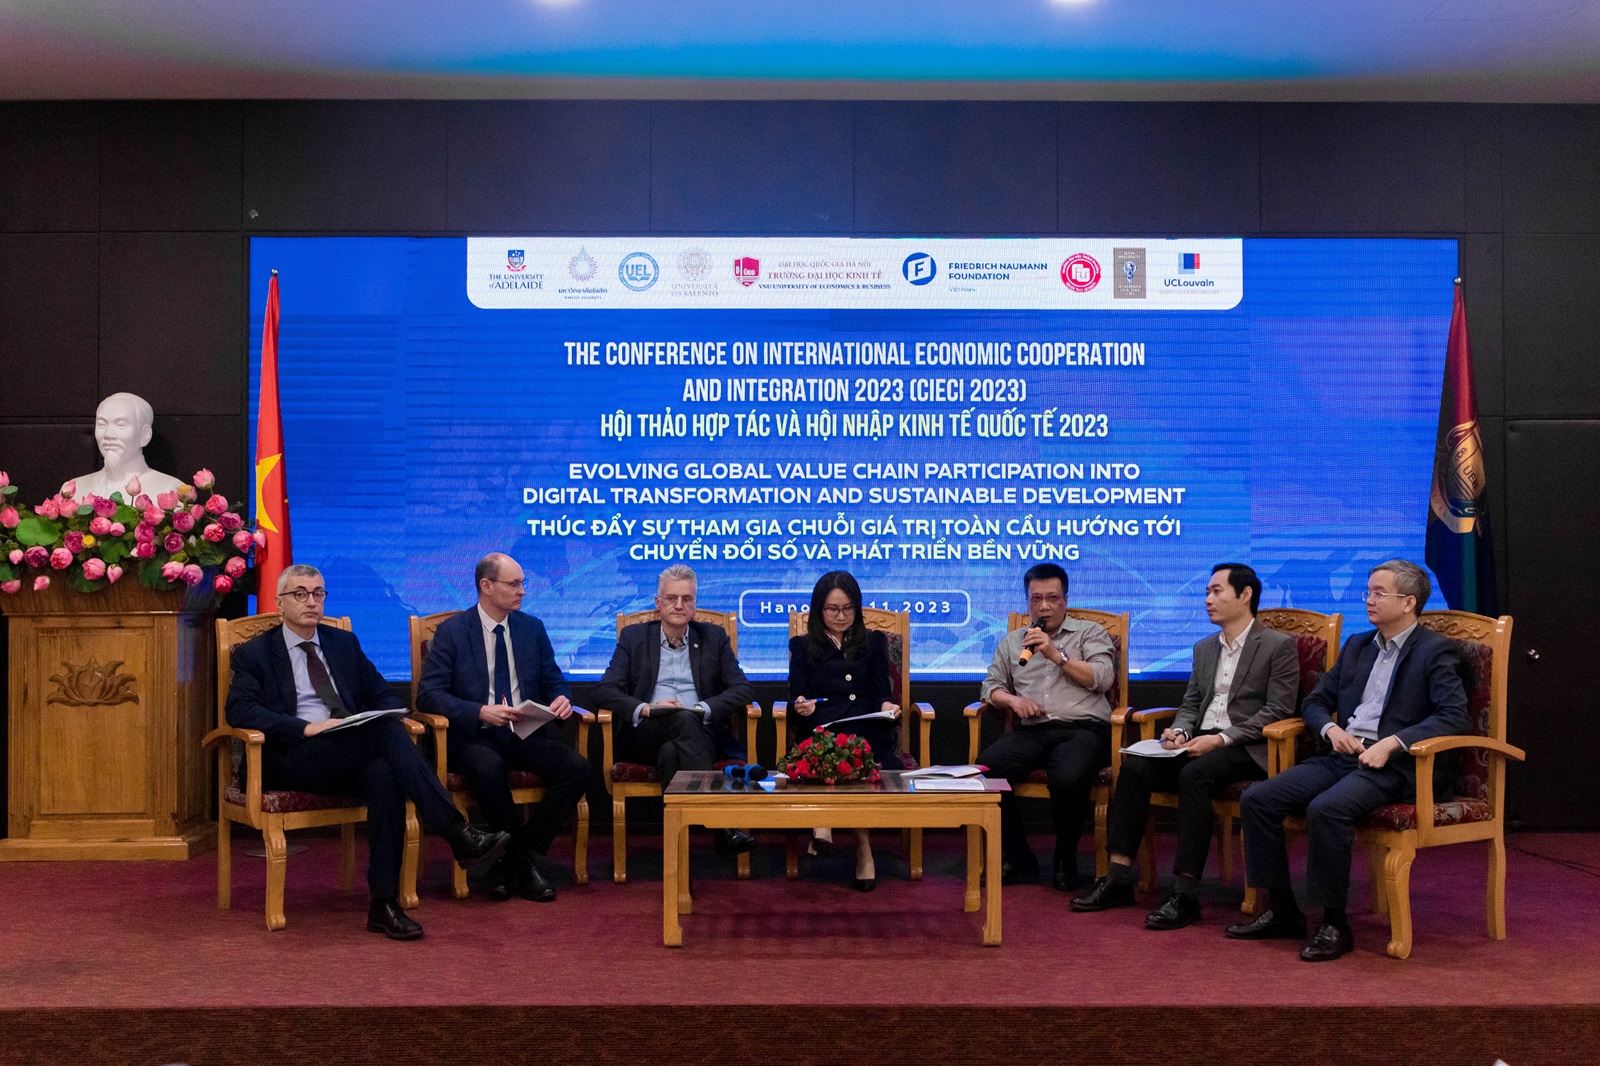 UEB Organizes CIECI 2023: Evolving Global Value Chain Participation Into Digital Transformation And Sustainable Development